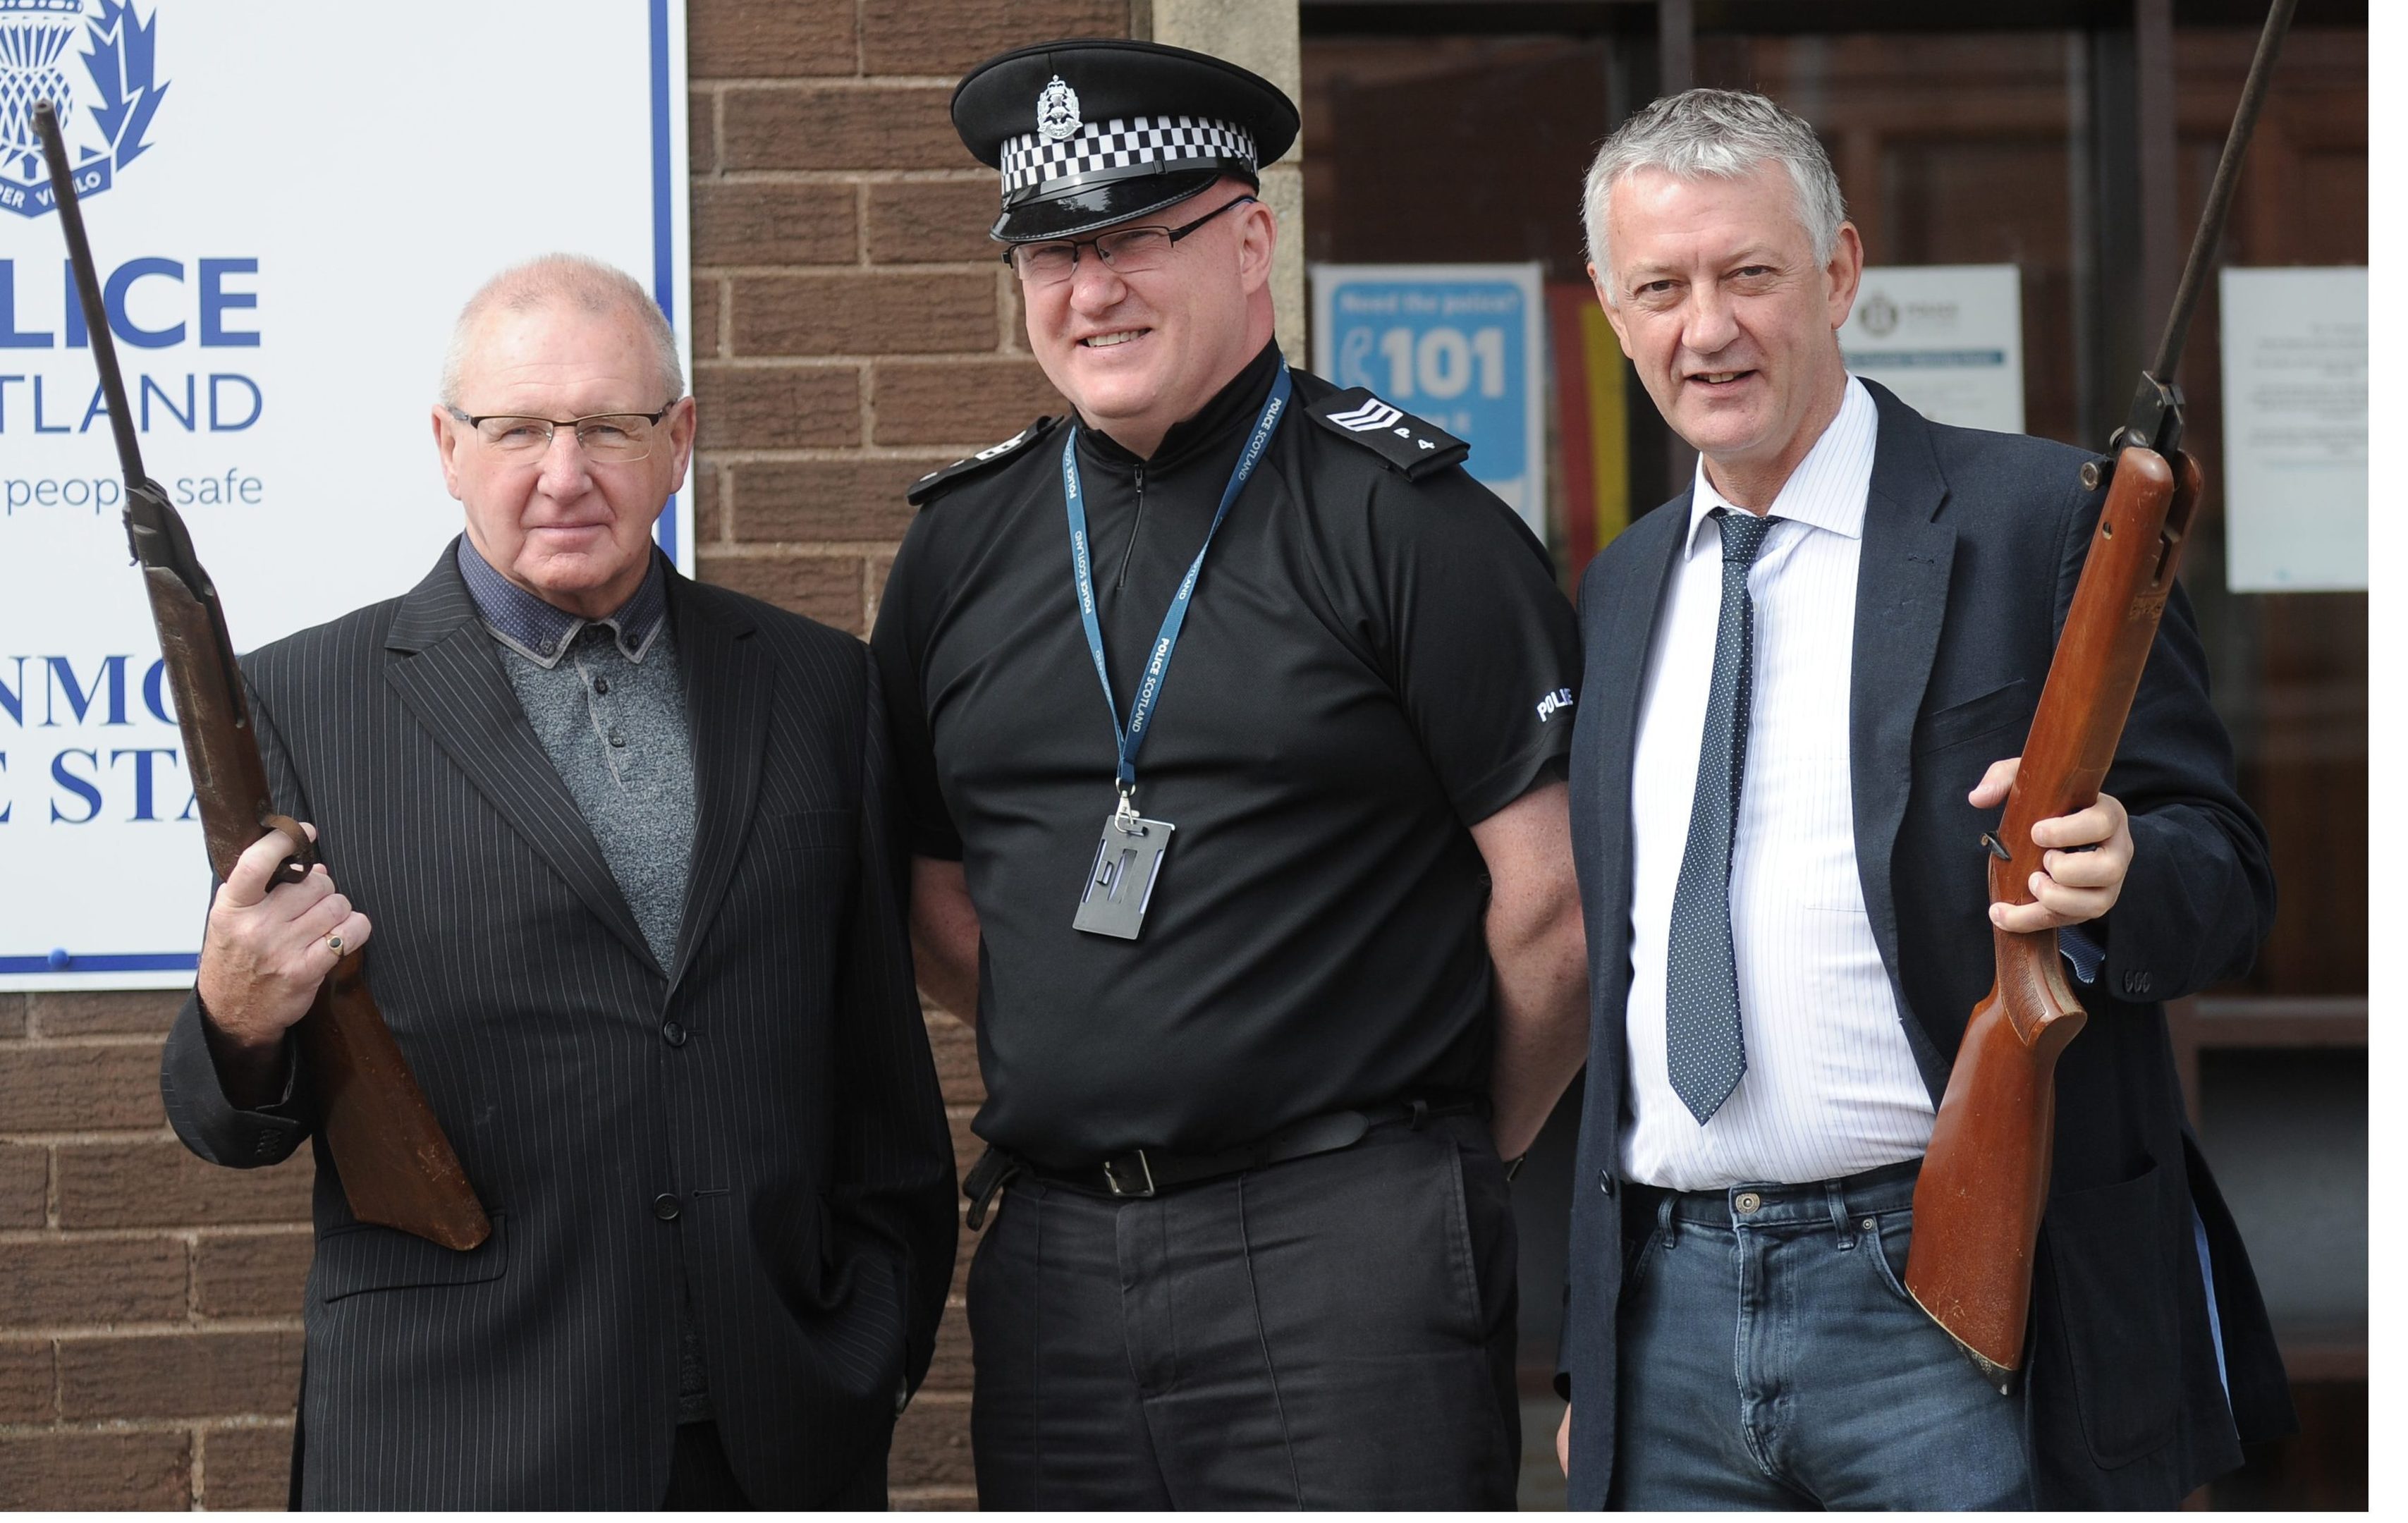 Councillor Bob Young (left) and Councillor Tom Adams handed in their unwanted air weapons to Sergeant Jim Anderson at Levenmouth police station.